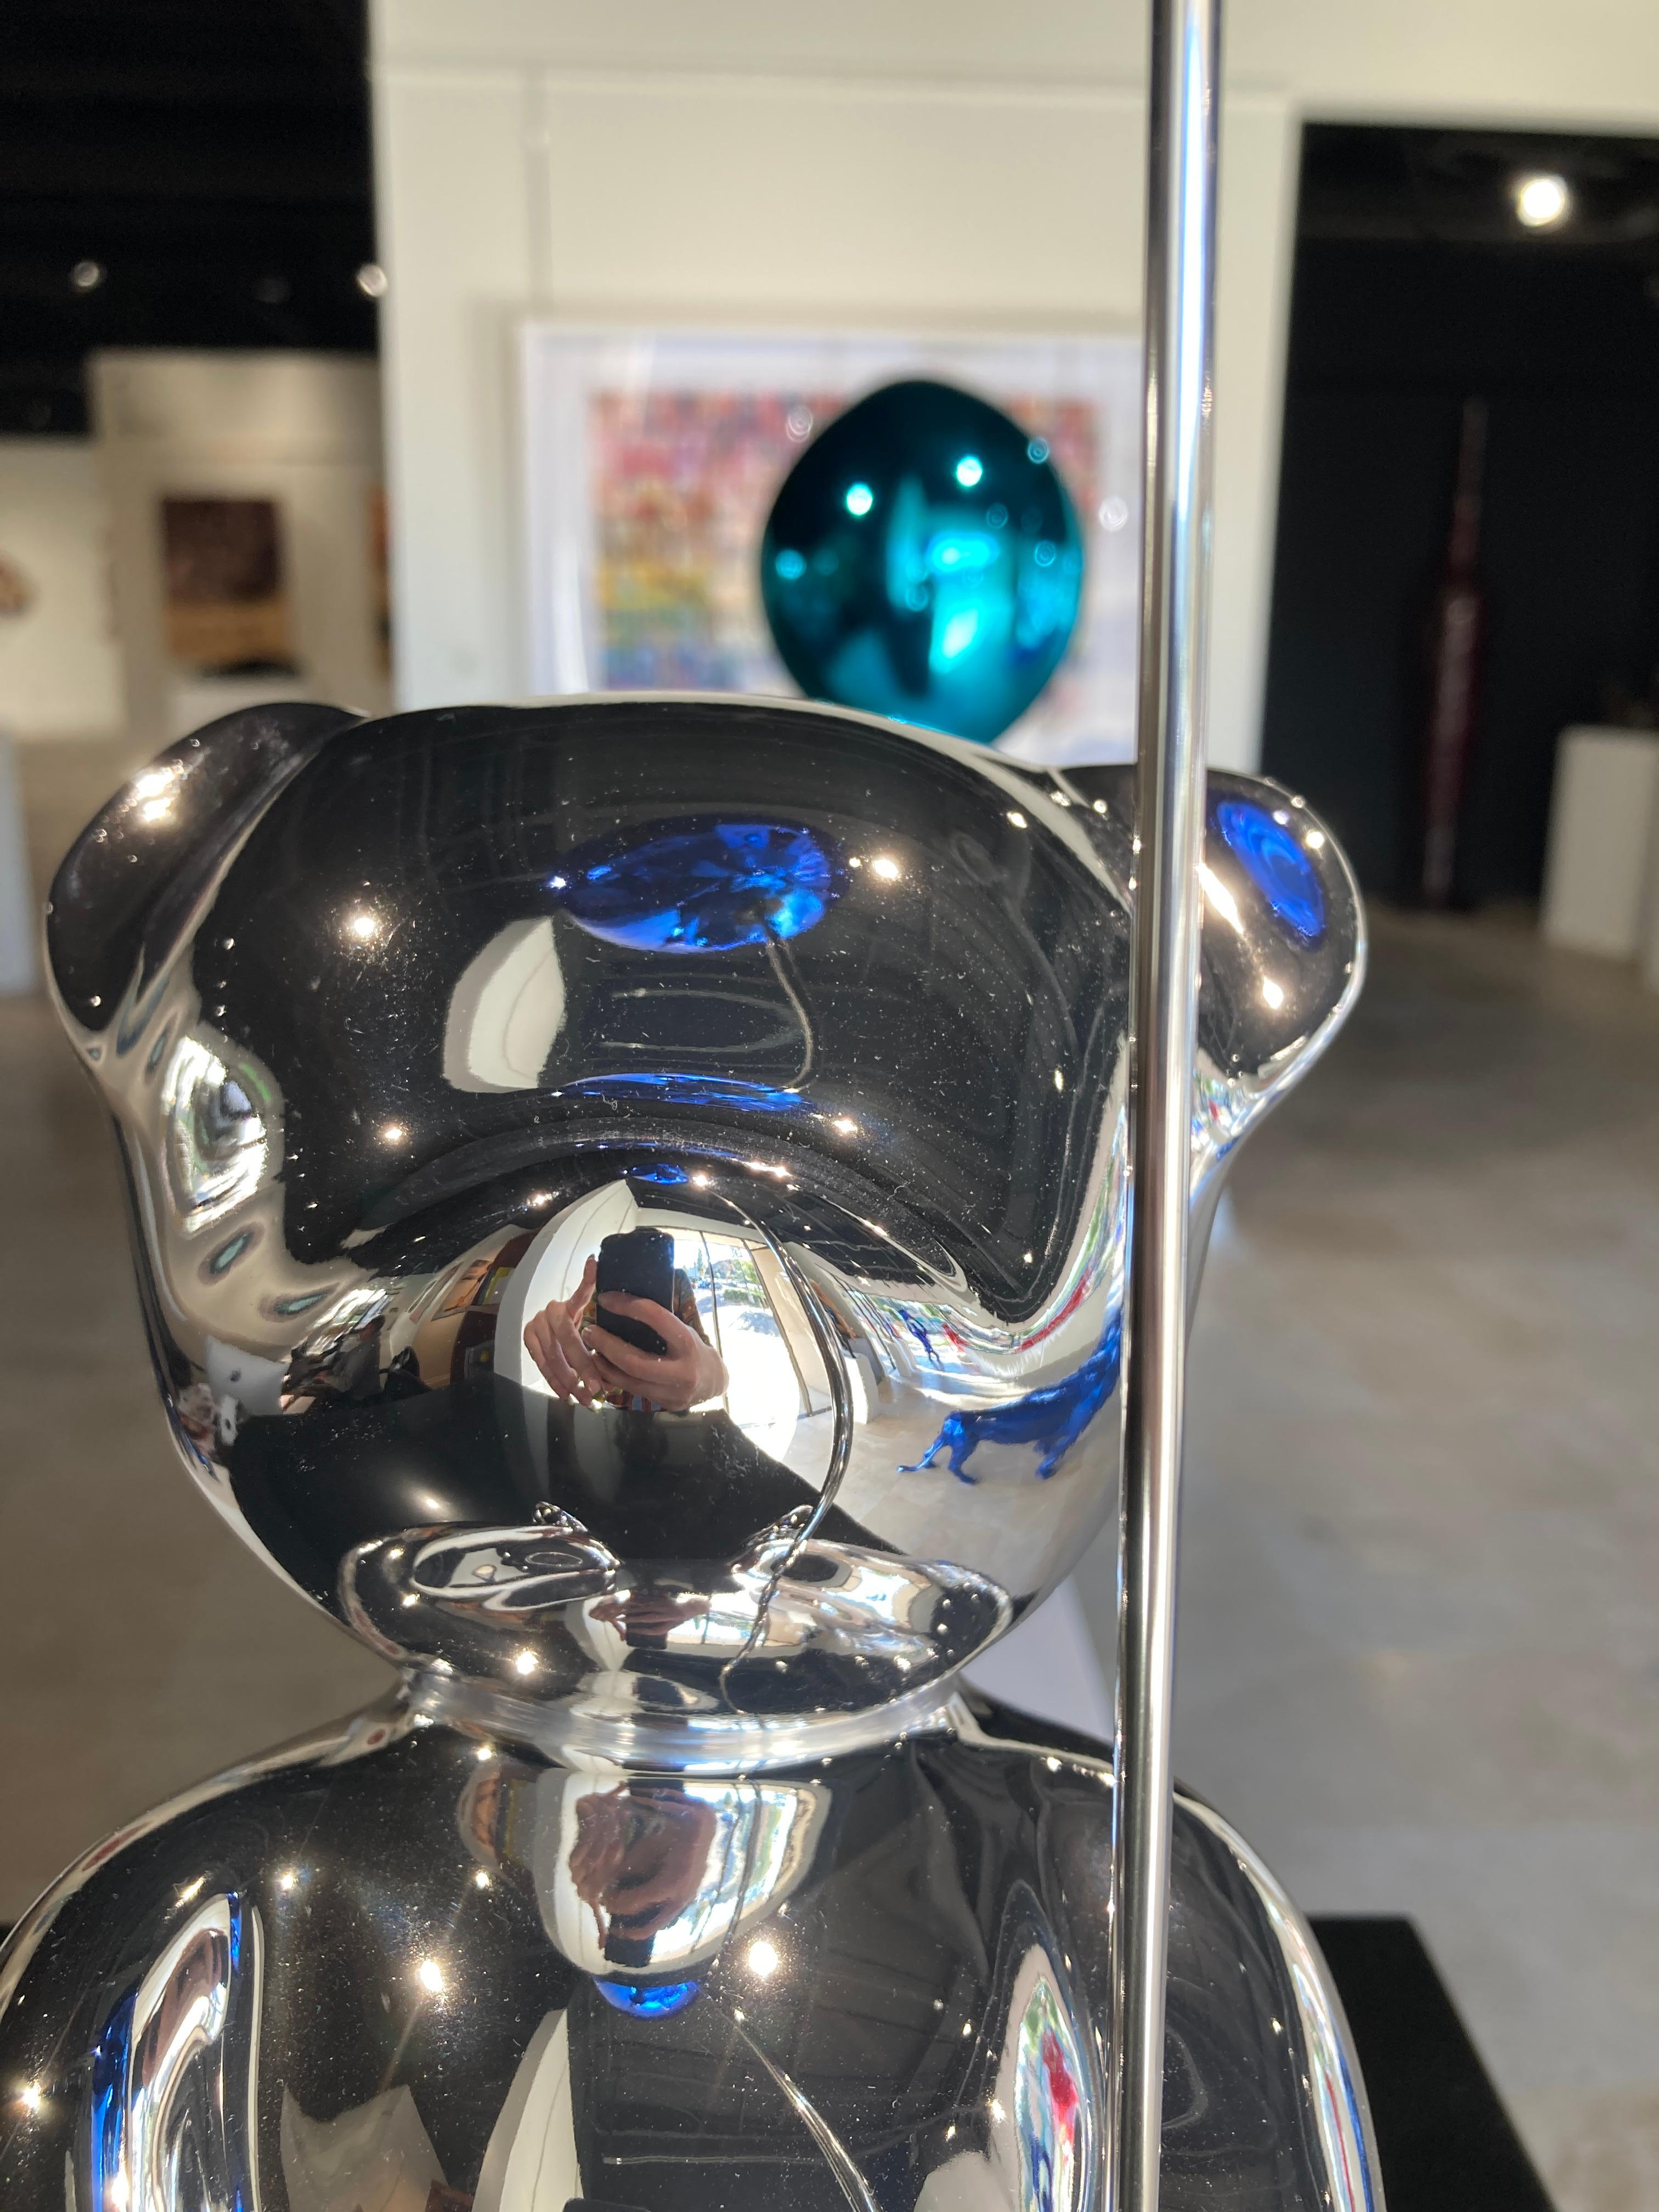 Resin with chrome finish. 
This will be signed and numbered limited edition number 3 of 8.  Commission only; it would take the artist apx 4-5 weeks to create this #3 of 8, which is the next one in the edition.

CÉVÉ was born in Paris in 1951. She